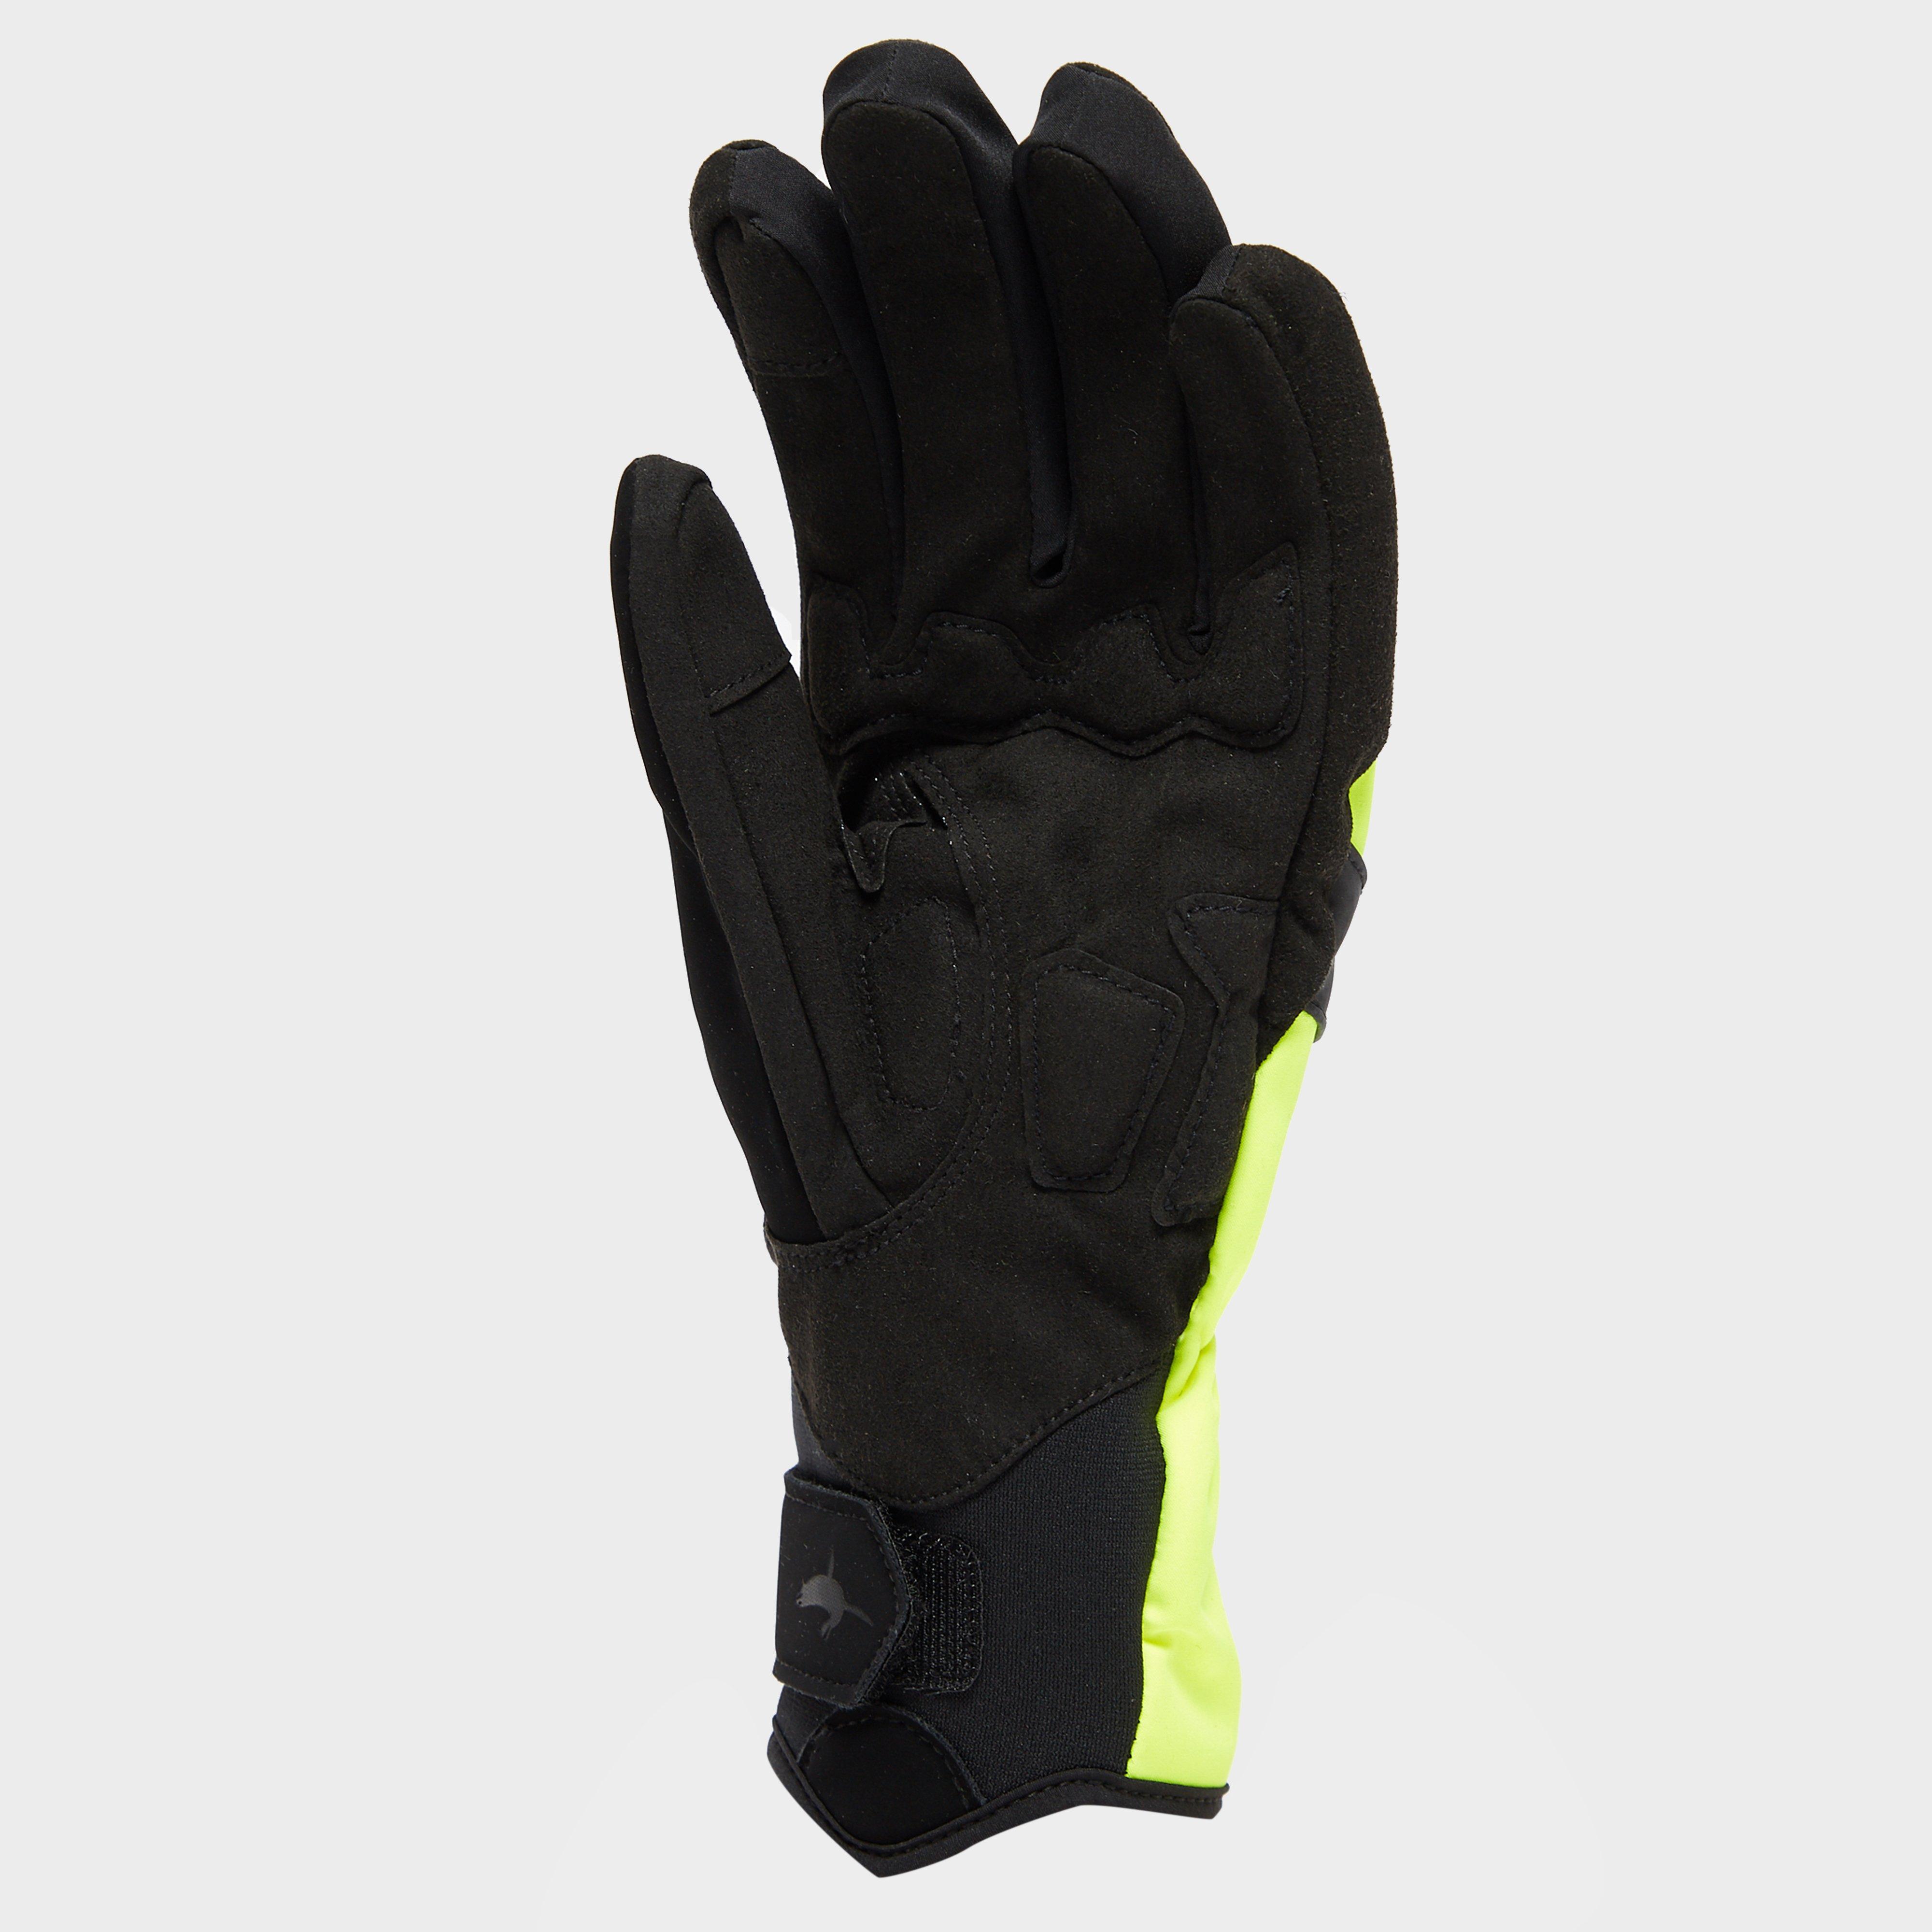 Sealskinz All Weather Cycle Gloves Review